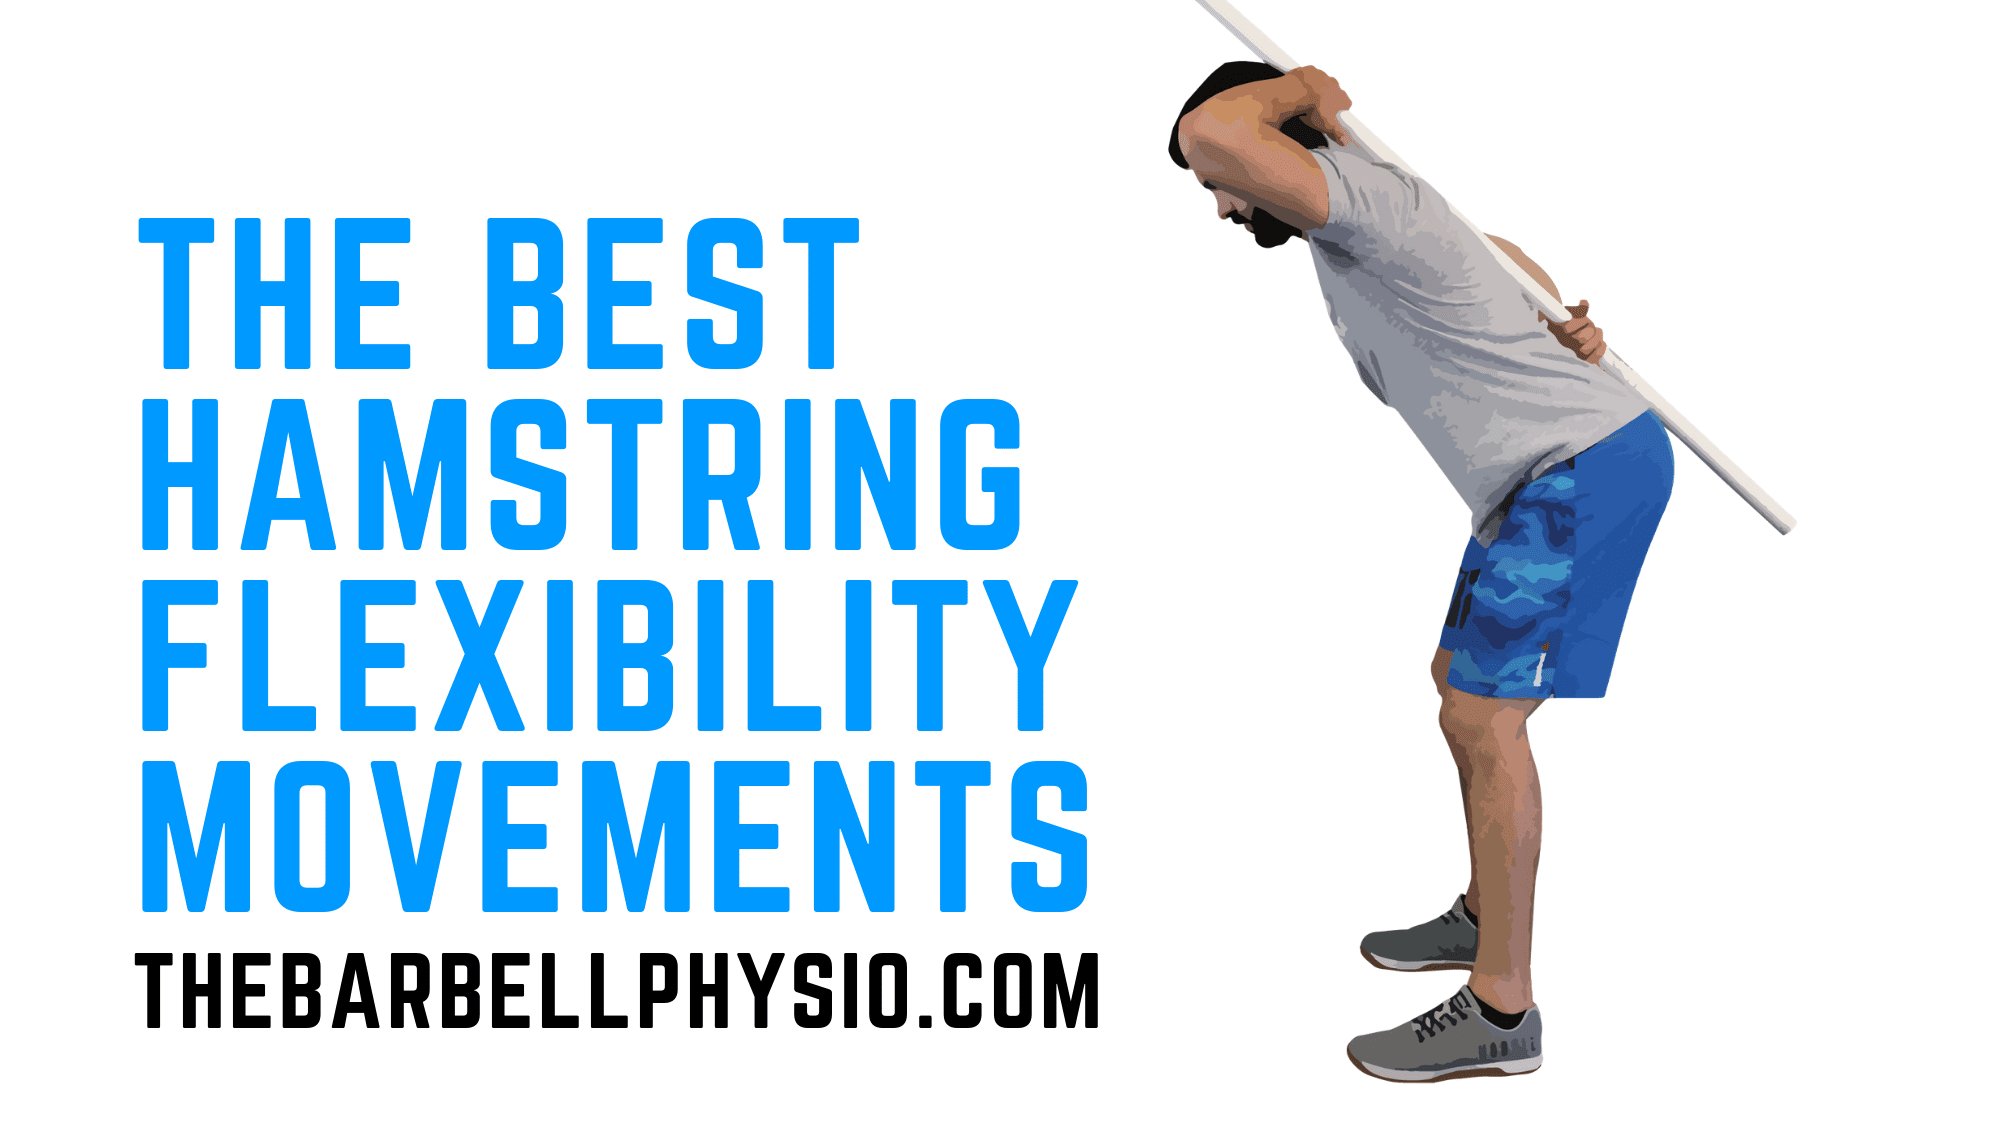 Featured image for “THE BEST HAMSTRING FLEXIBILITY EXERCISES”